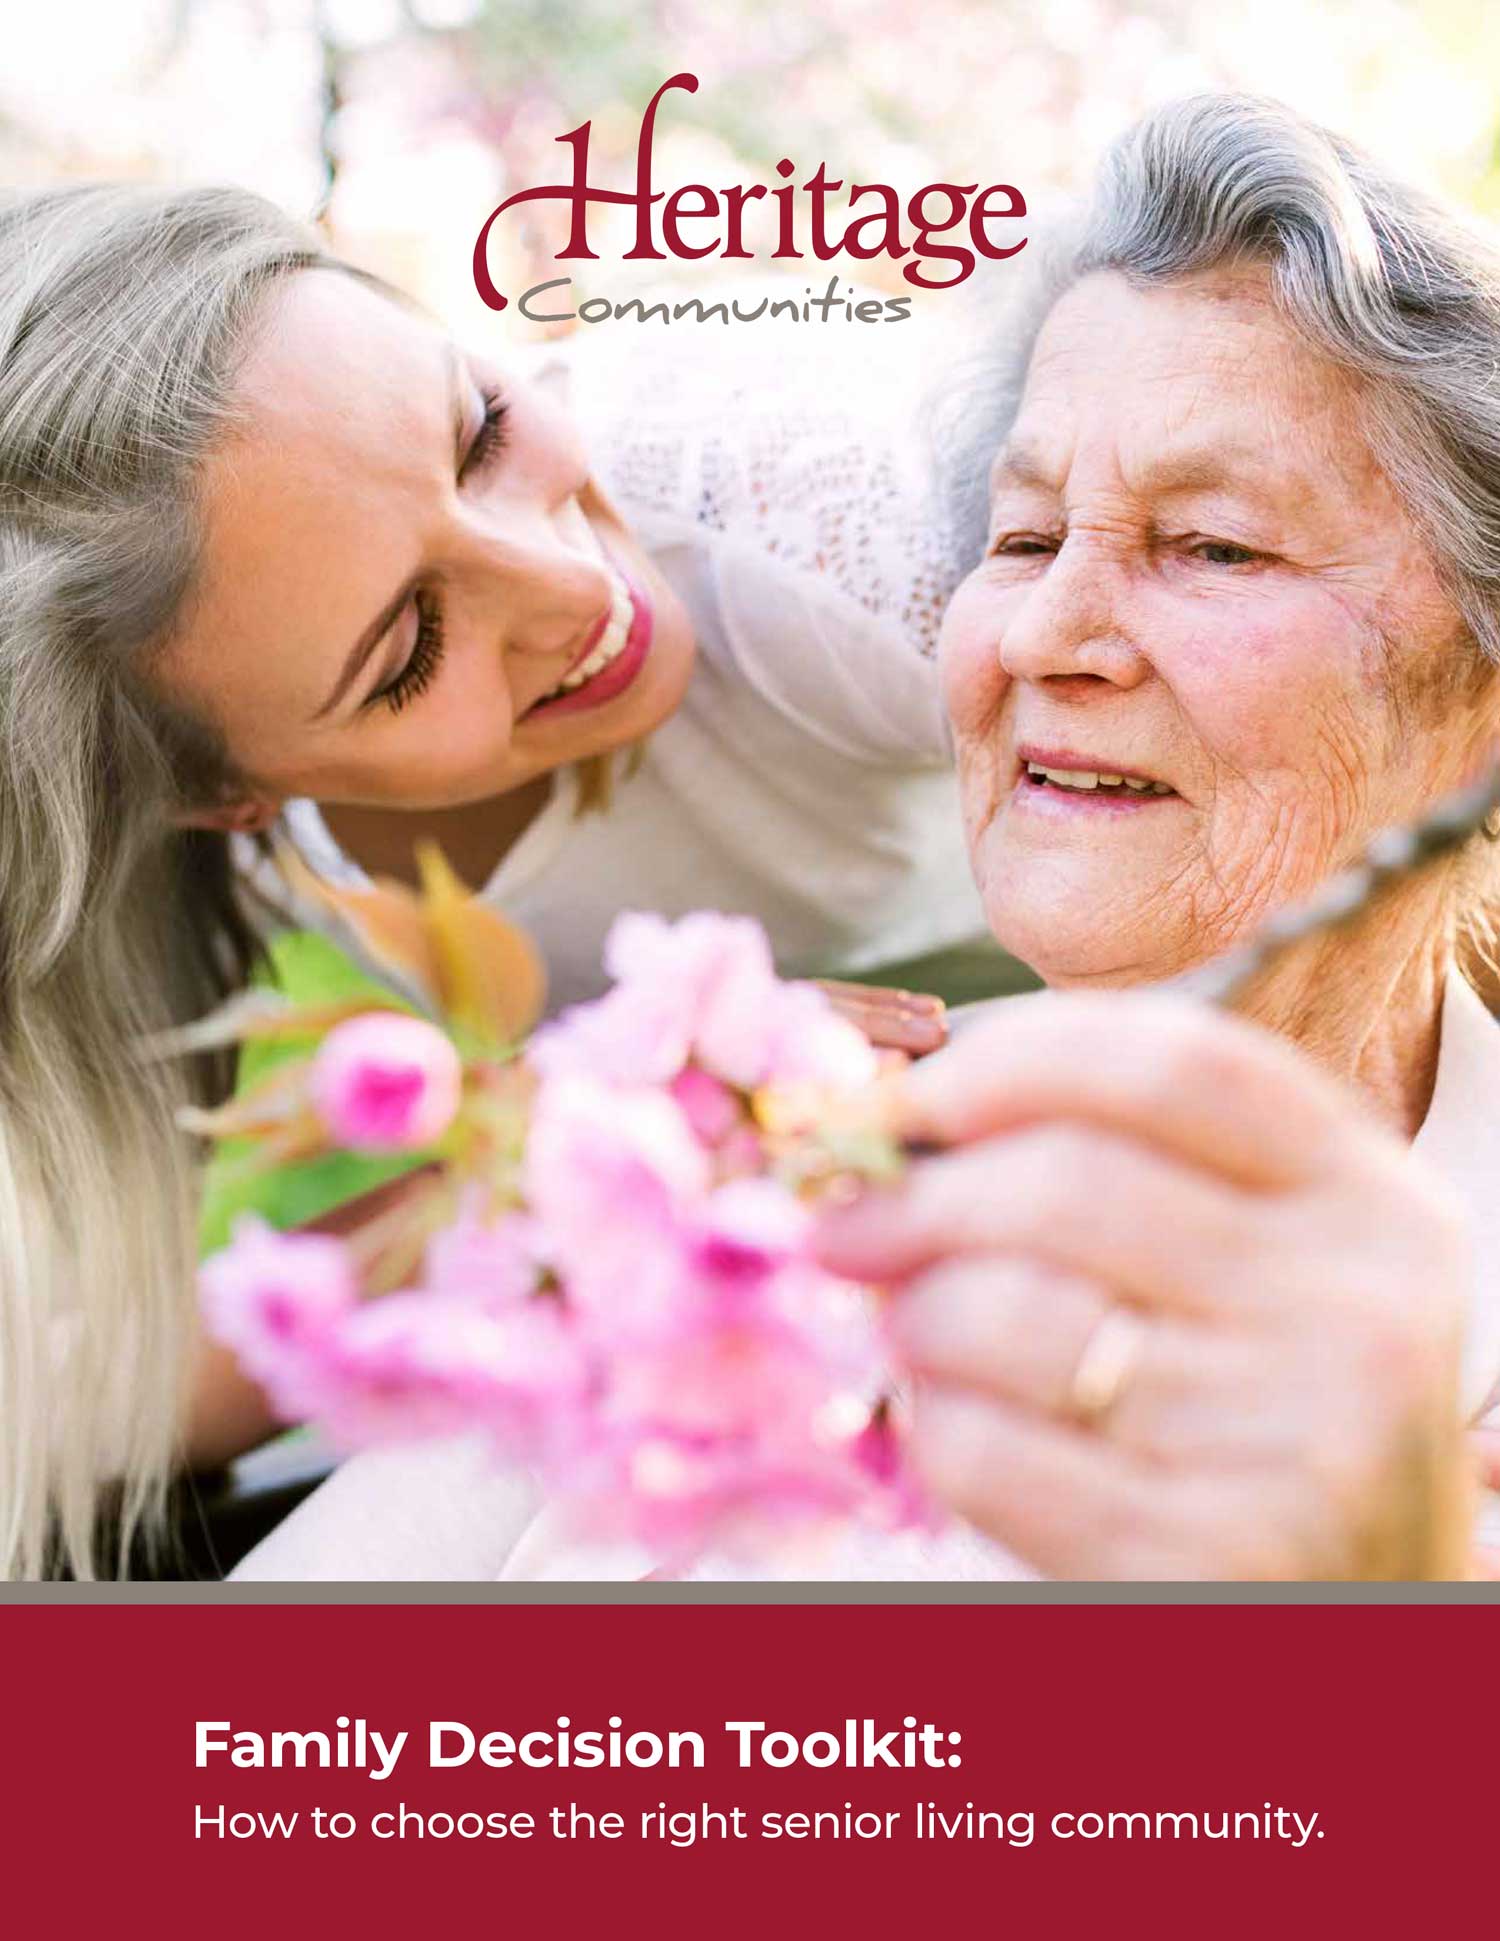 Heritage Family Decision Toolkit Guide Cover